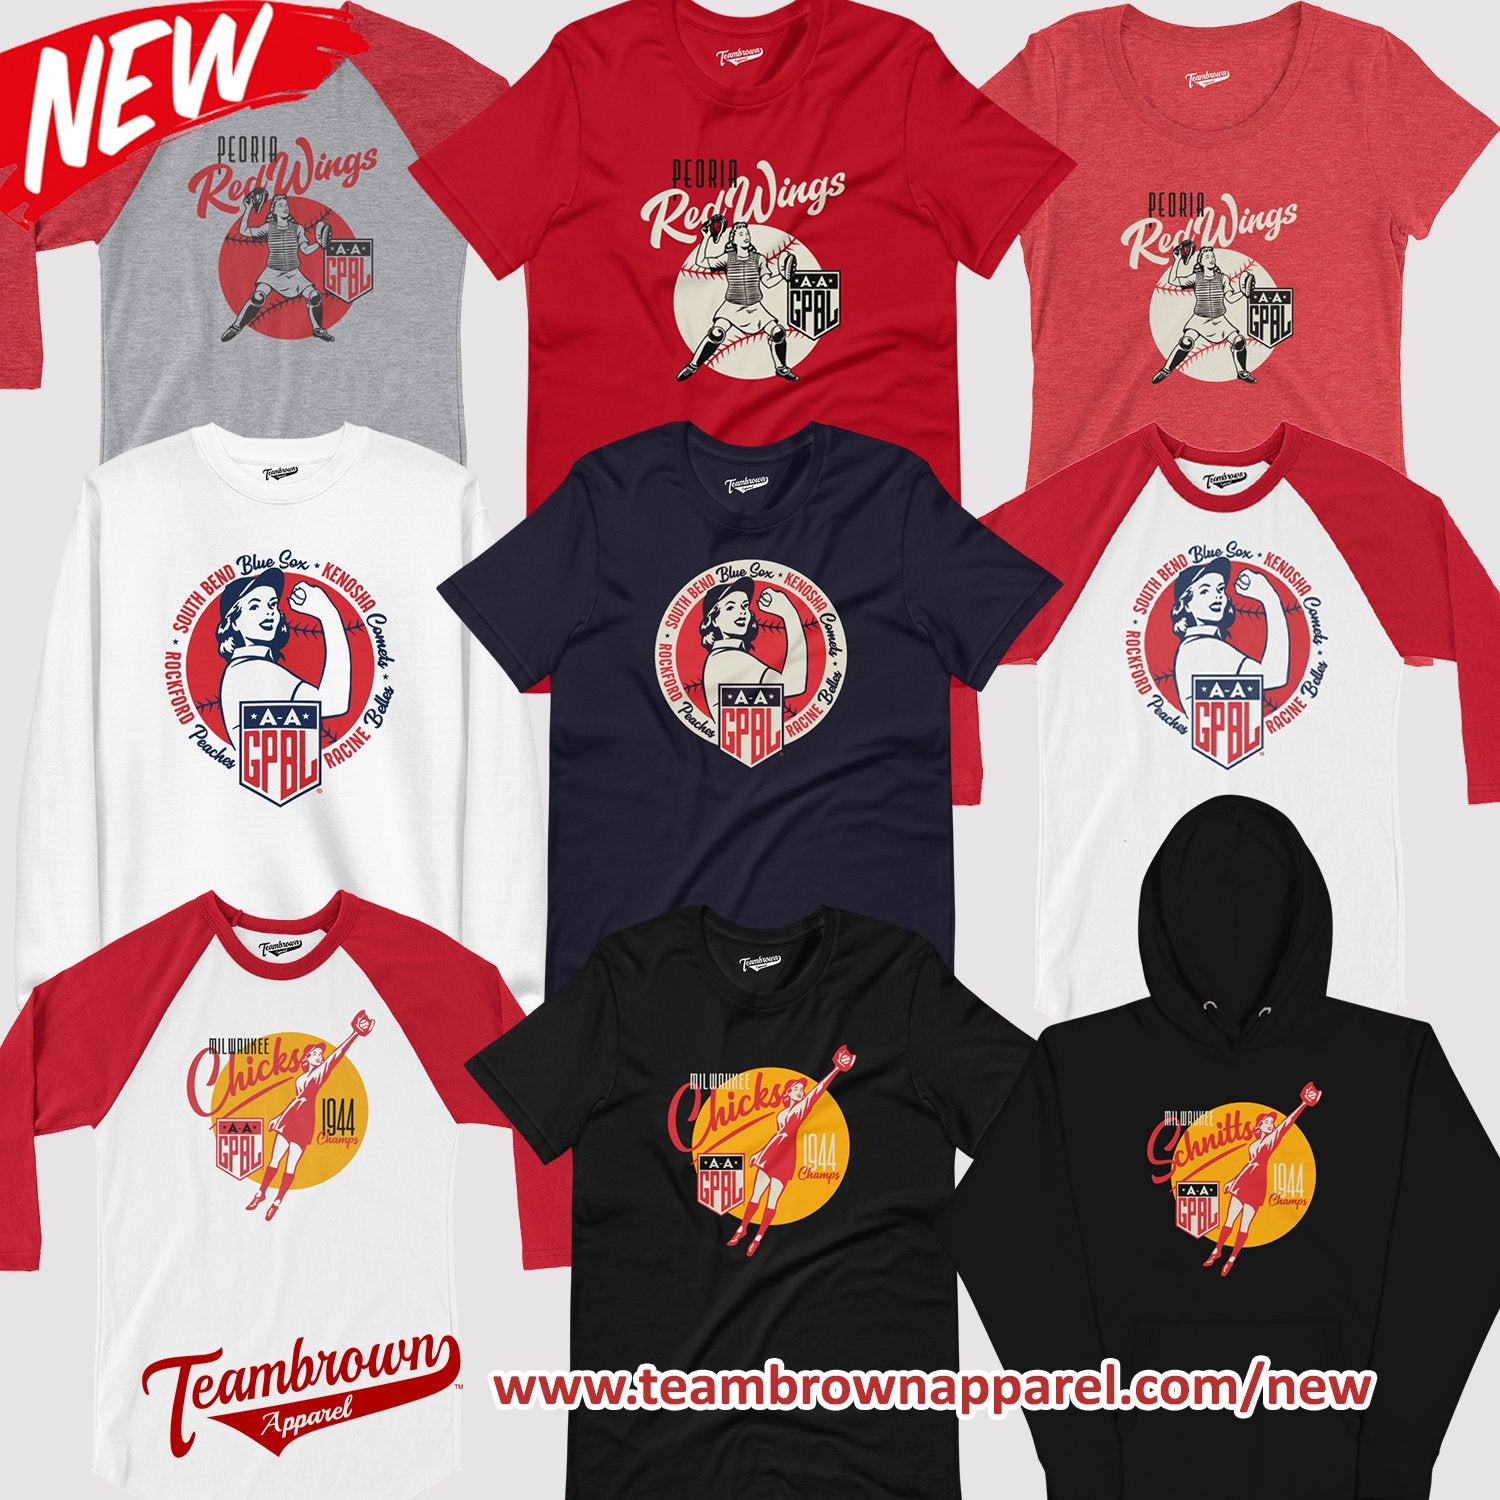 All Products at Teambrown Apparel